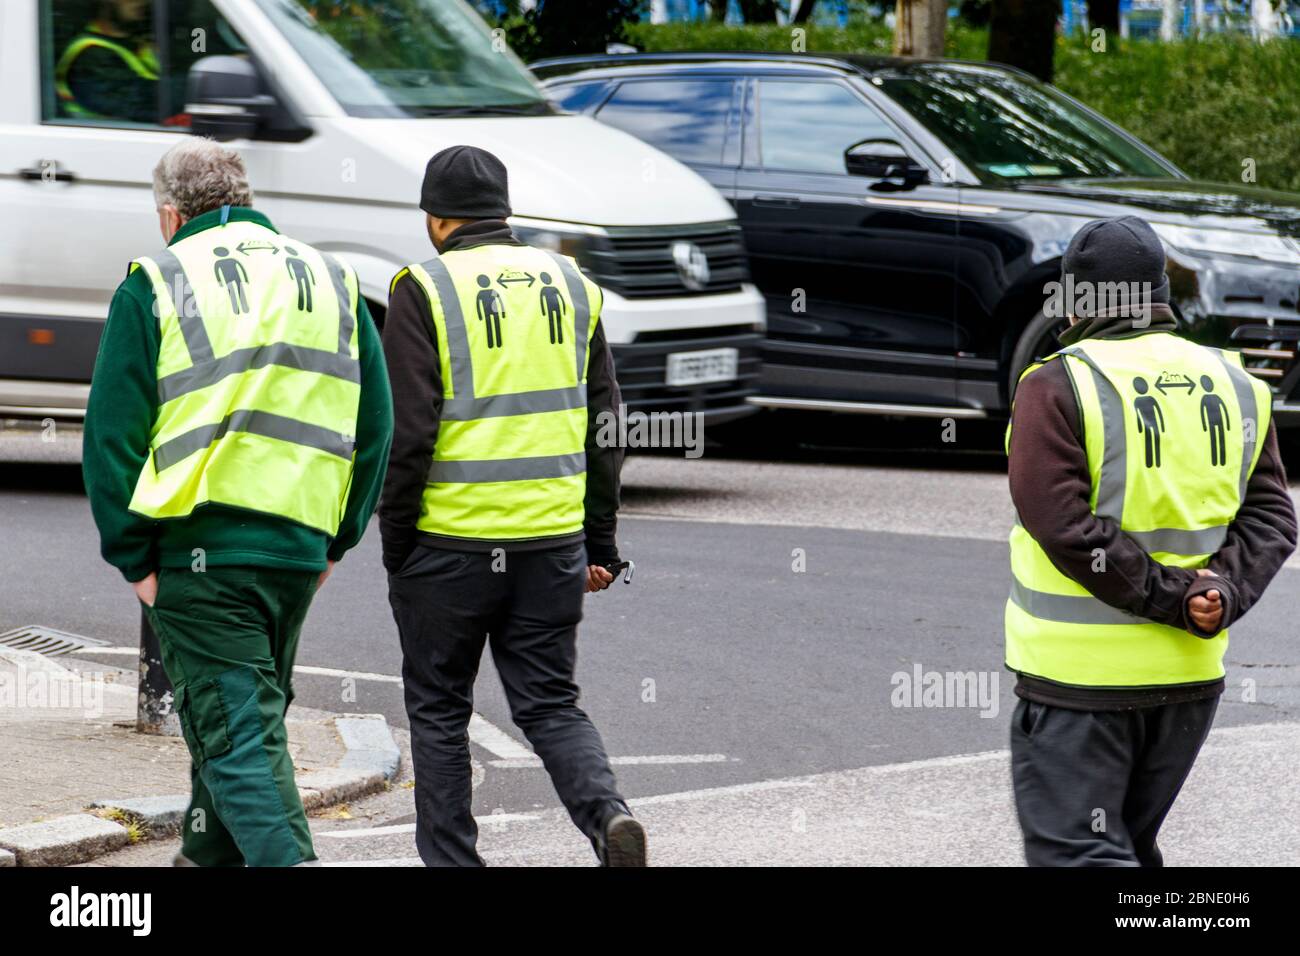 Three council workers ignoring the social distancing advice to stay 2 metres apart, written on the backs of their high-visibility jackets, London, UK Stock Photo